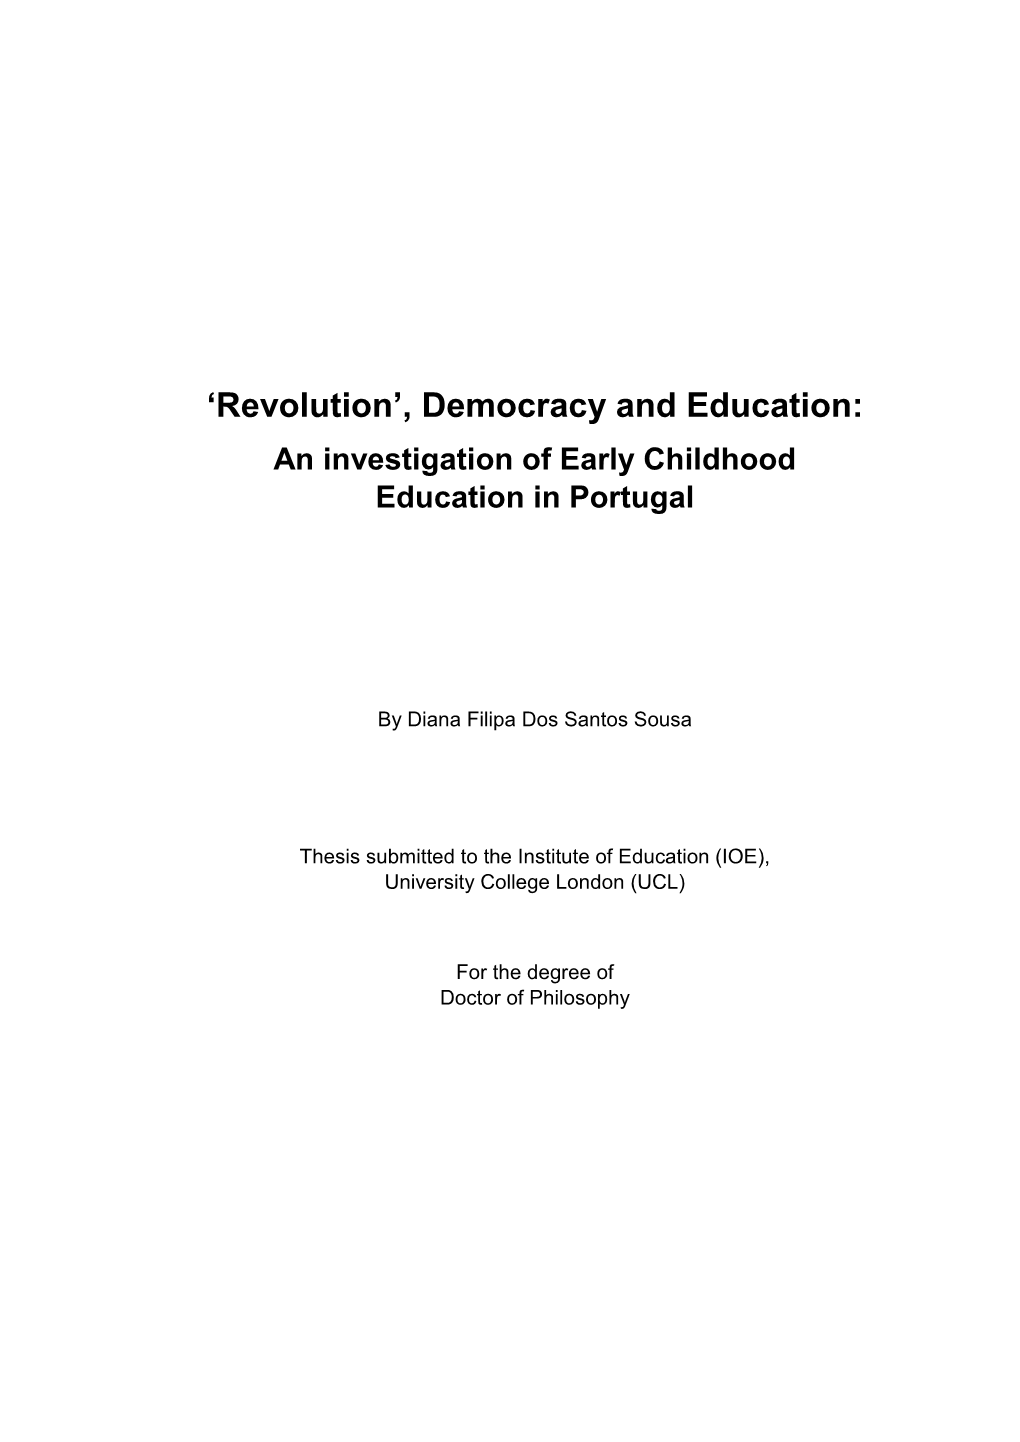 Democracy and Education: an Investigation of Early Childhood Education in Portugal